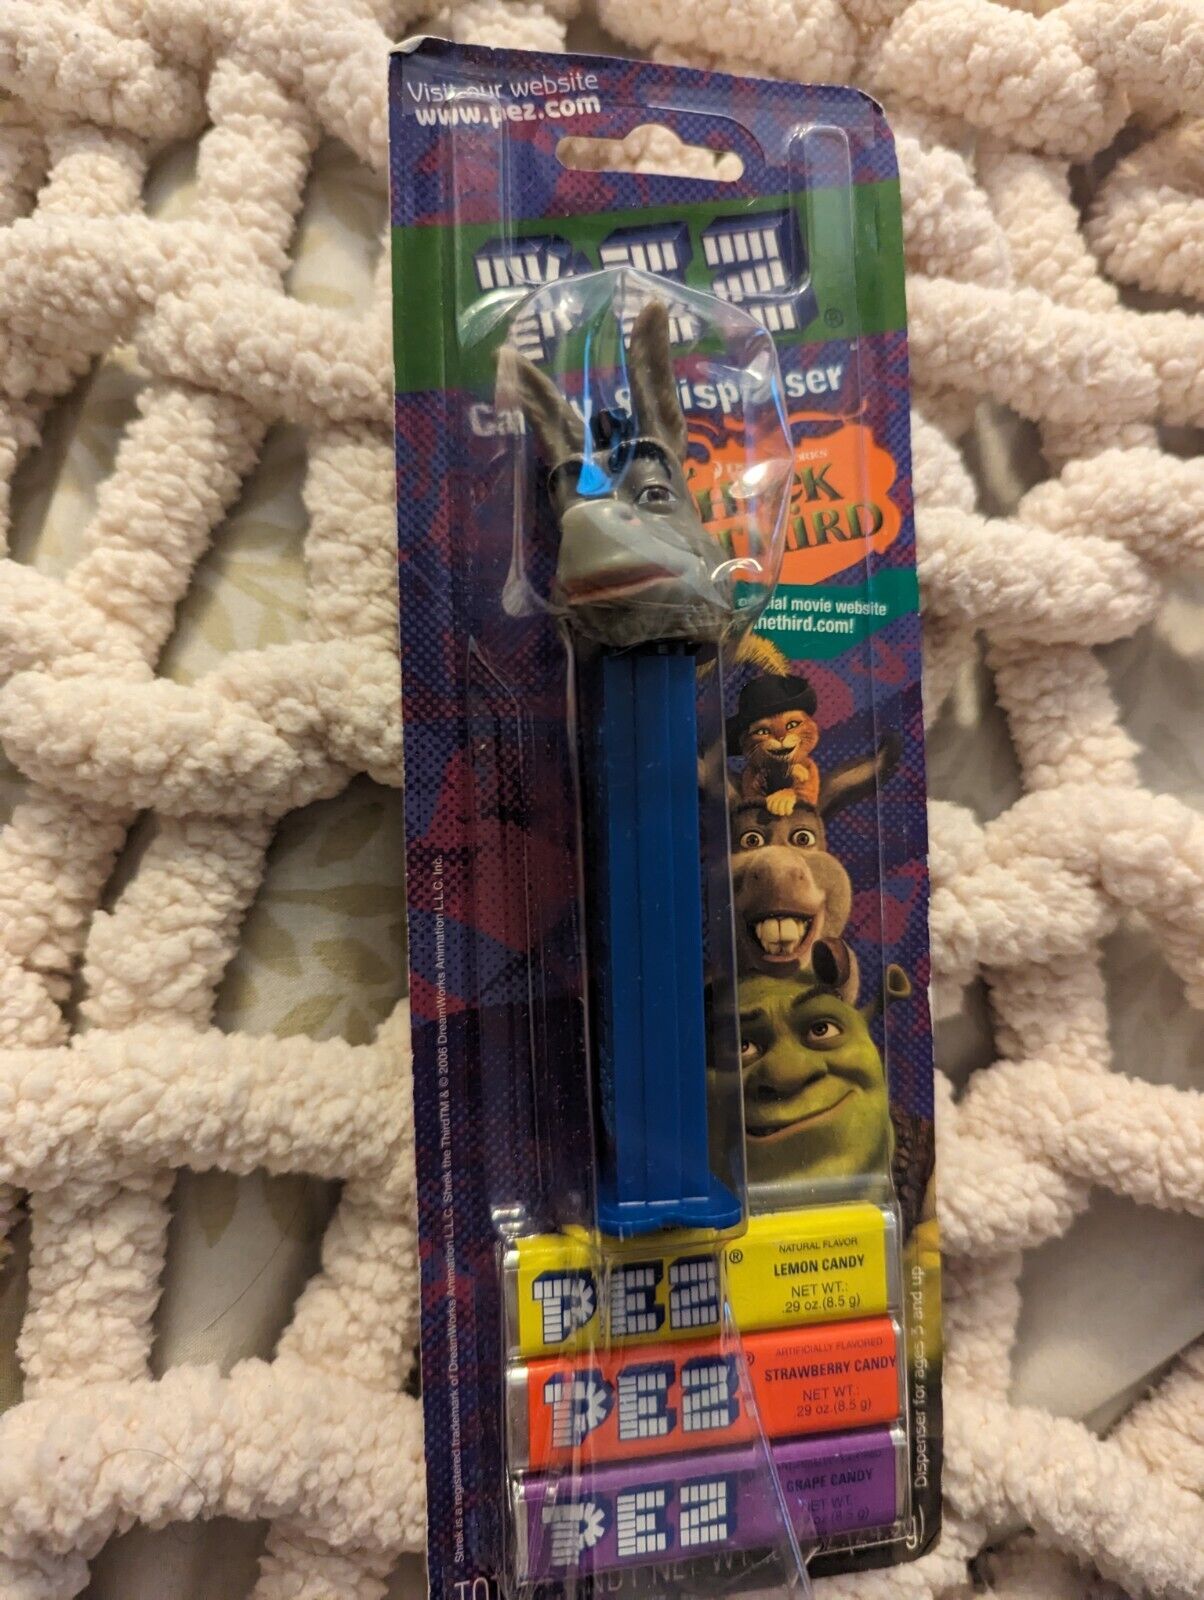 Shrek The Third Pez Dispenser and Candy (From the DreamWorks Movie)